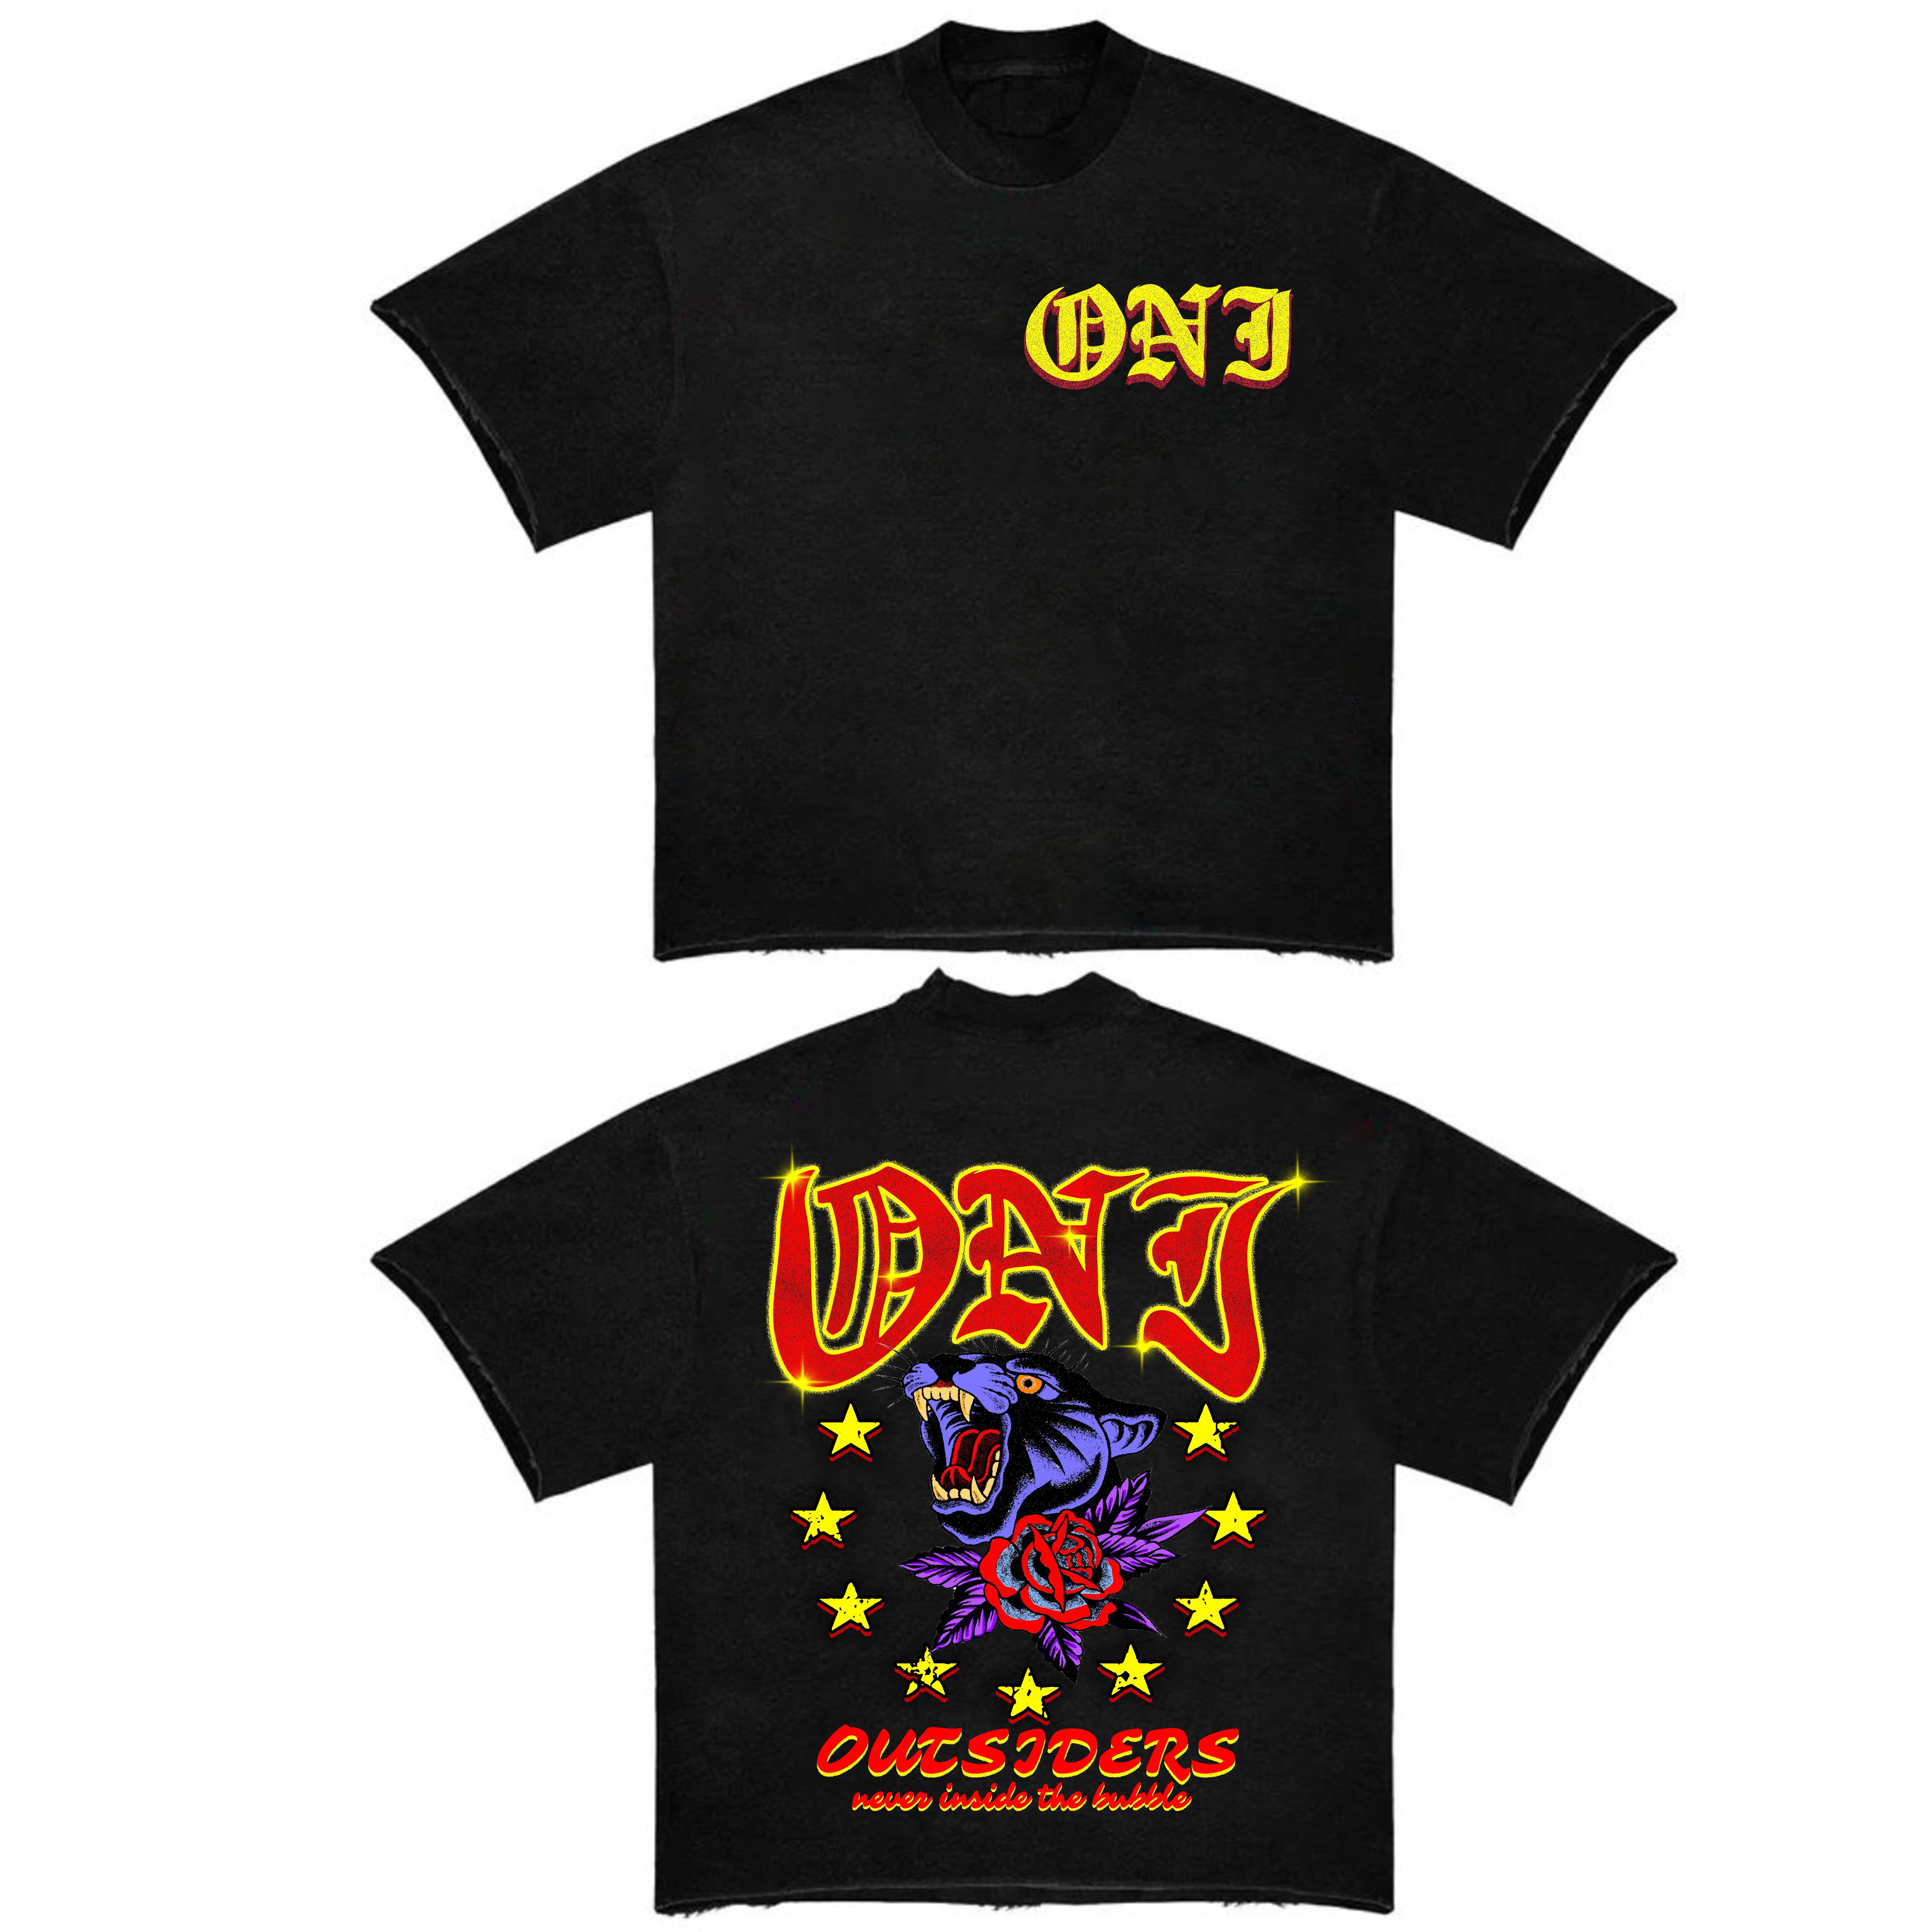 a black t-shirt with yellow and red text